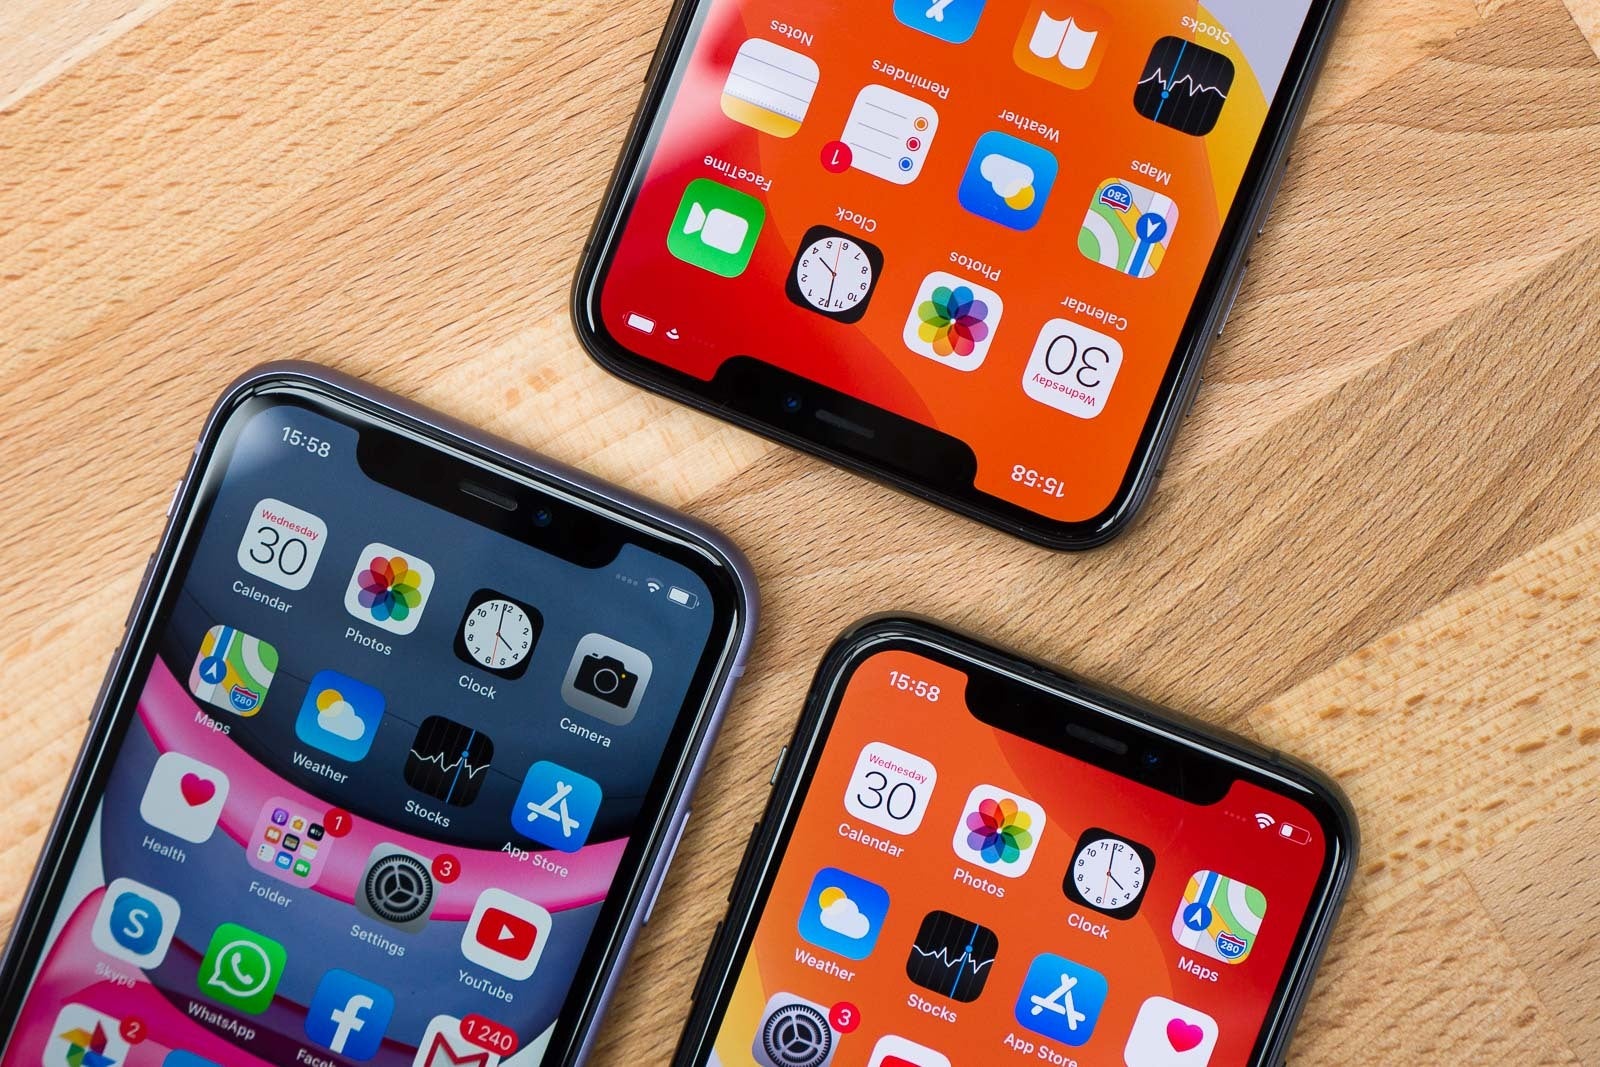 The iPhone 11 and iPhone 11 Pro - The iPhone 11 series returned Apple to growth in China last quarter